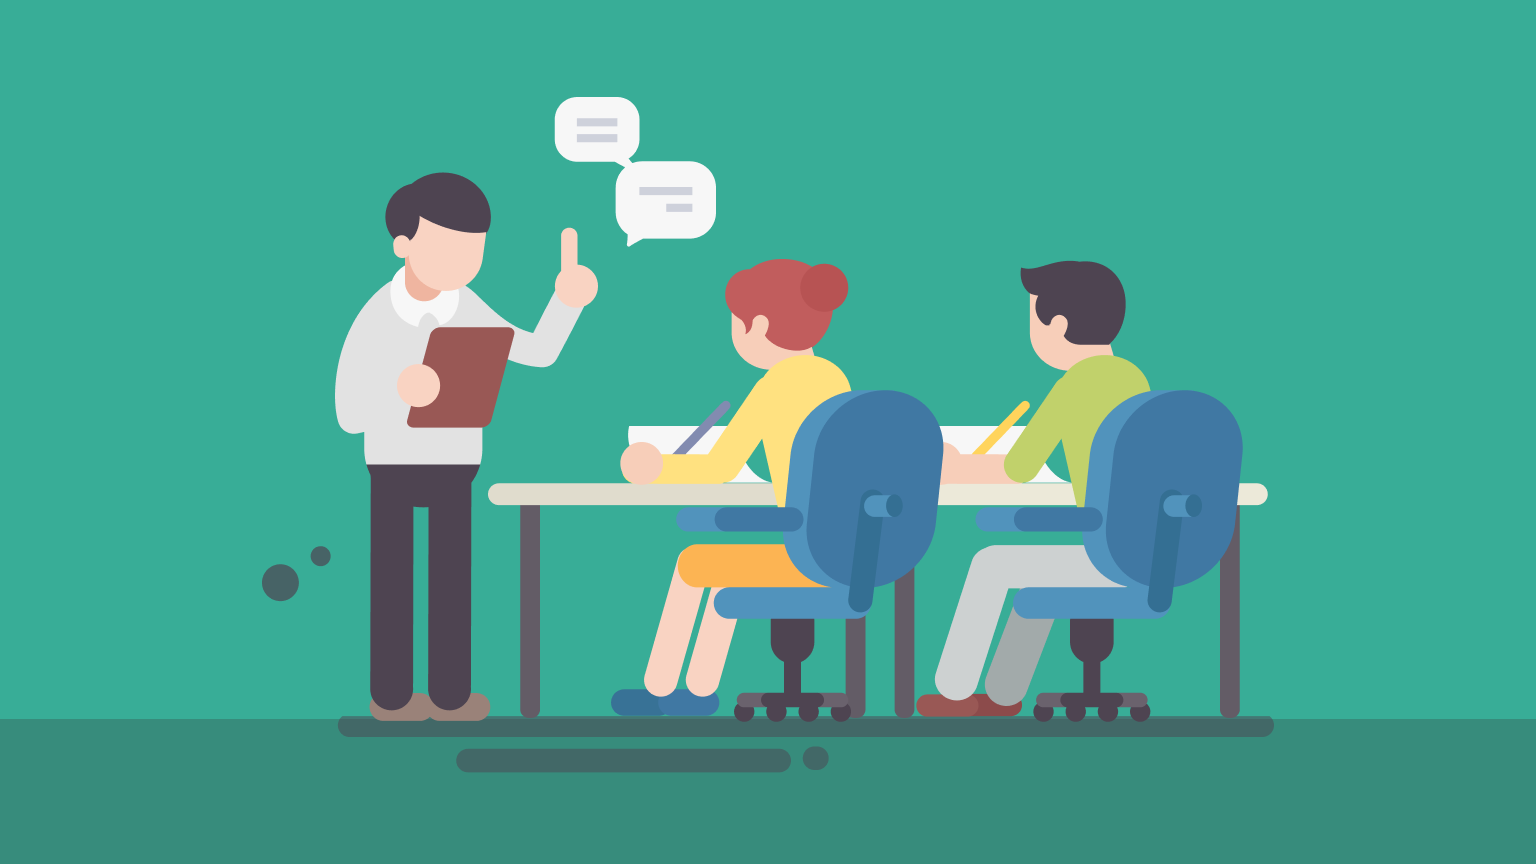 Effective meeting feedback survey questions guide